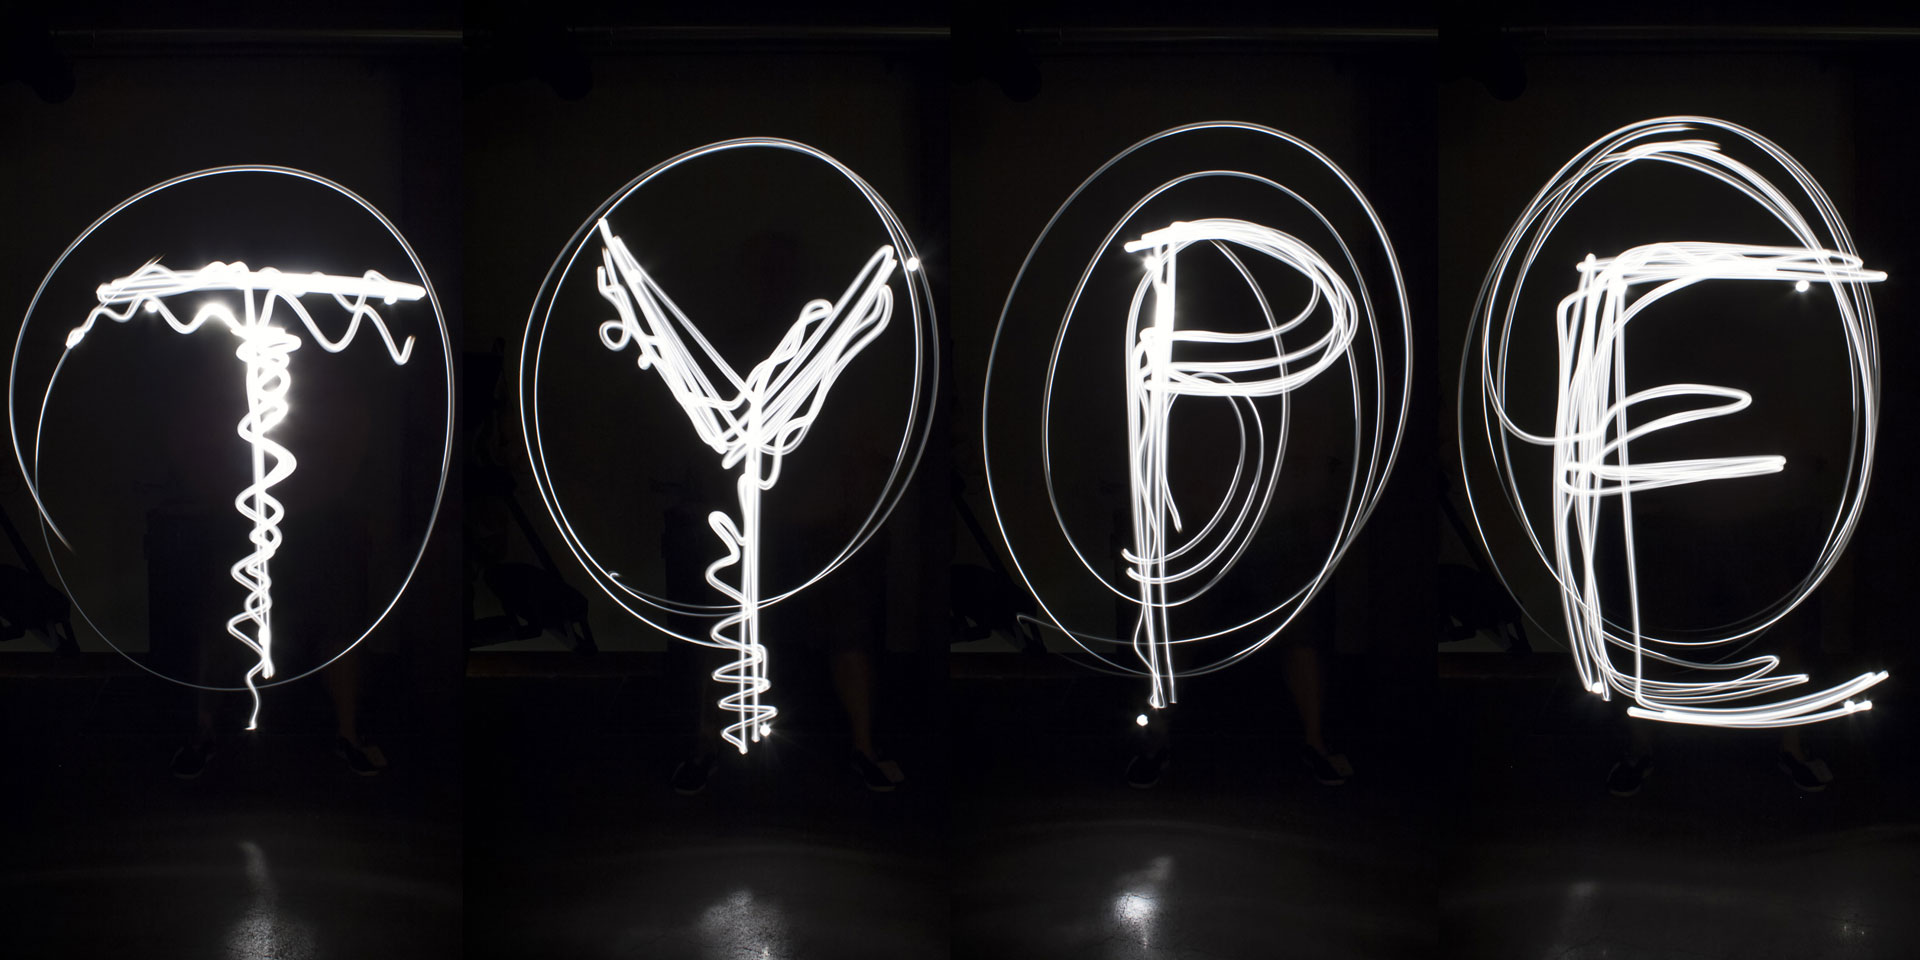 Typographic light painting experiment.